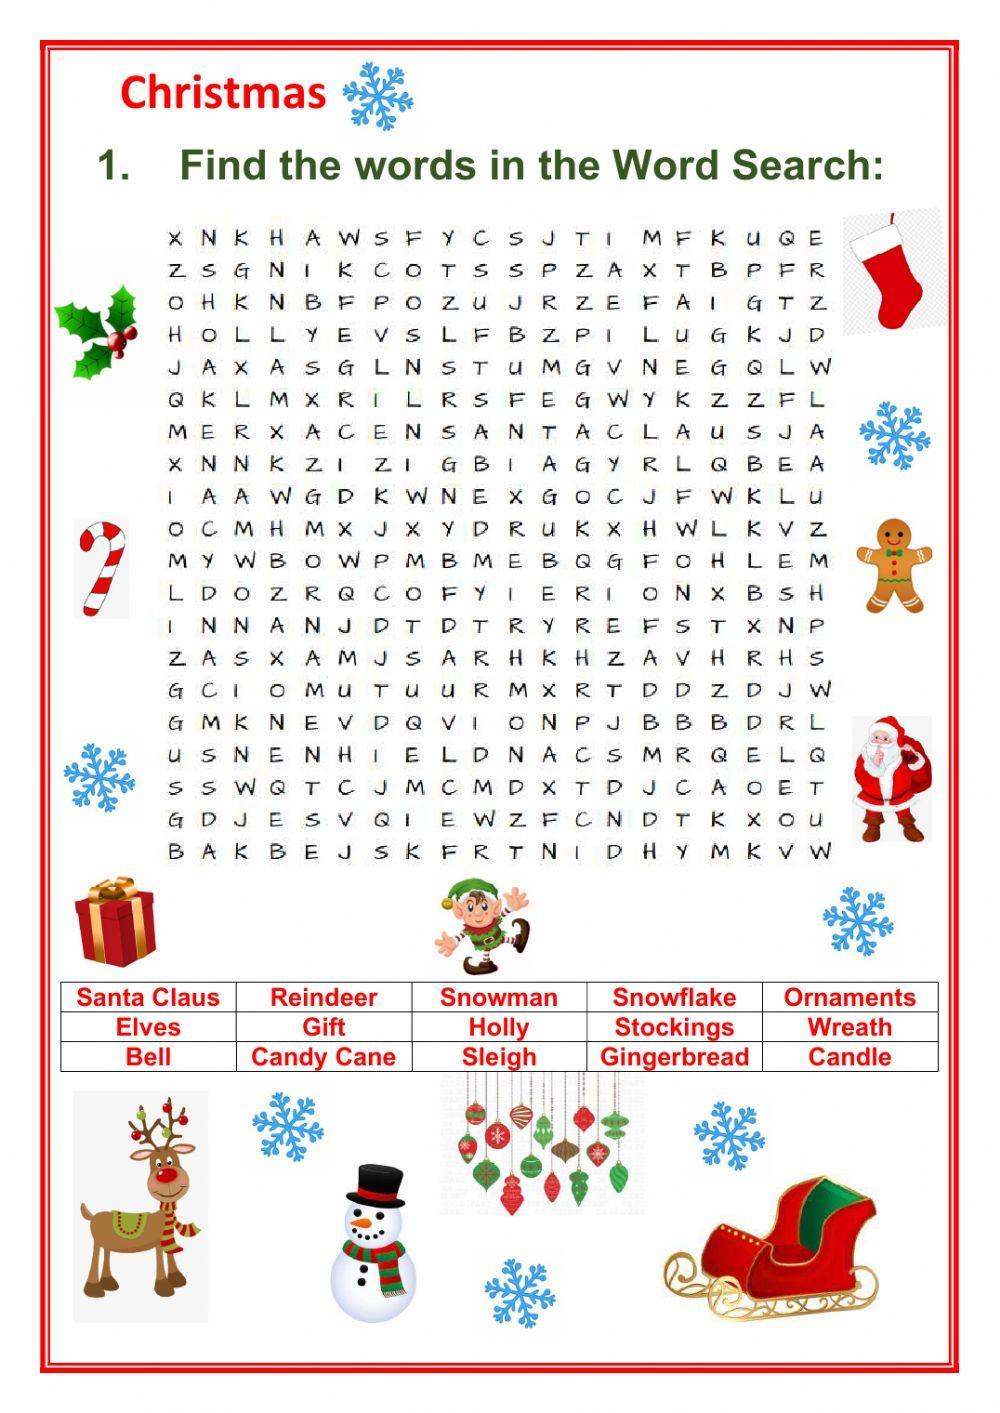 Christmas WordSearch